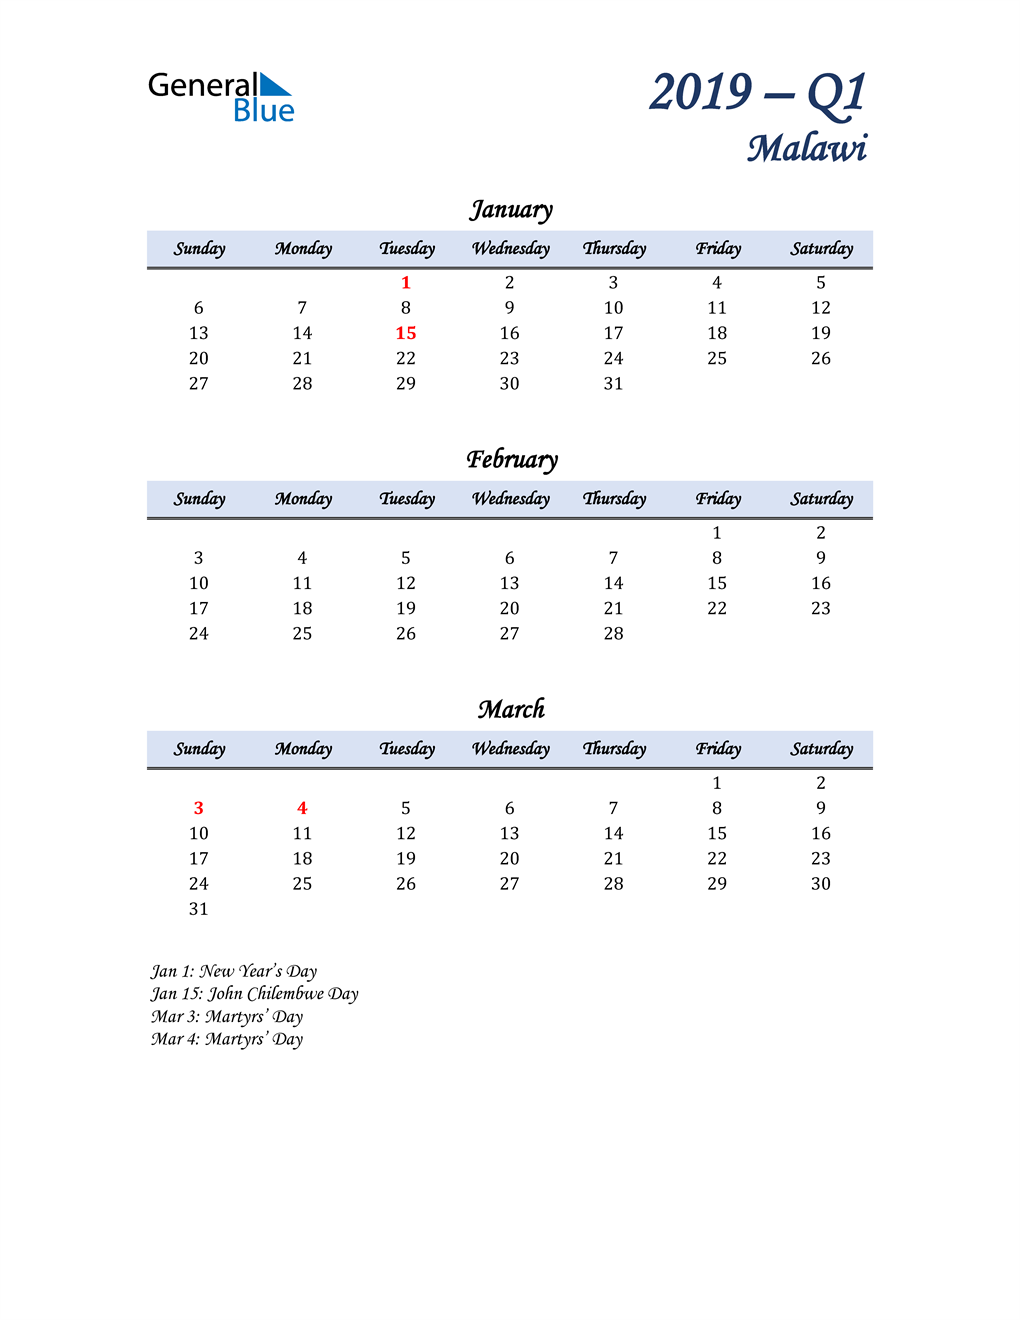  January, February, and March Calendar for Malawi